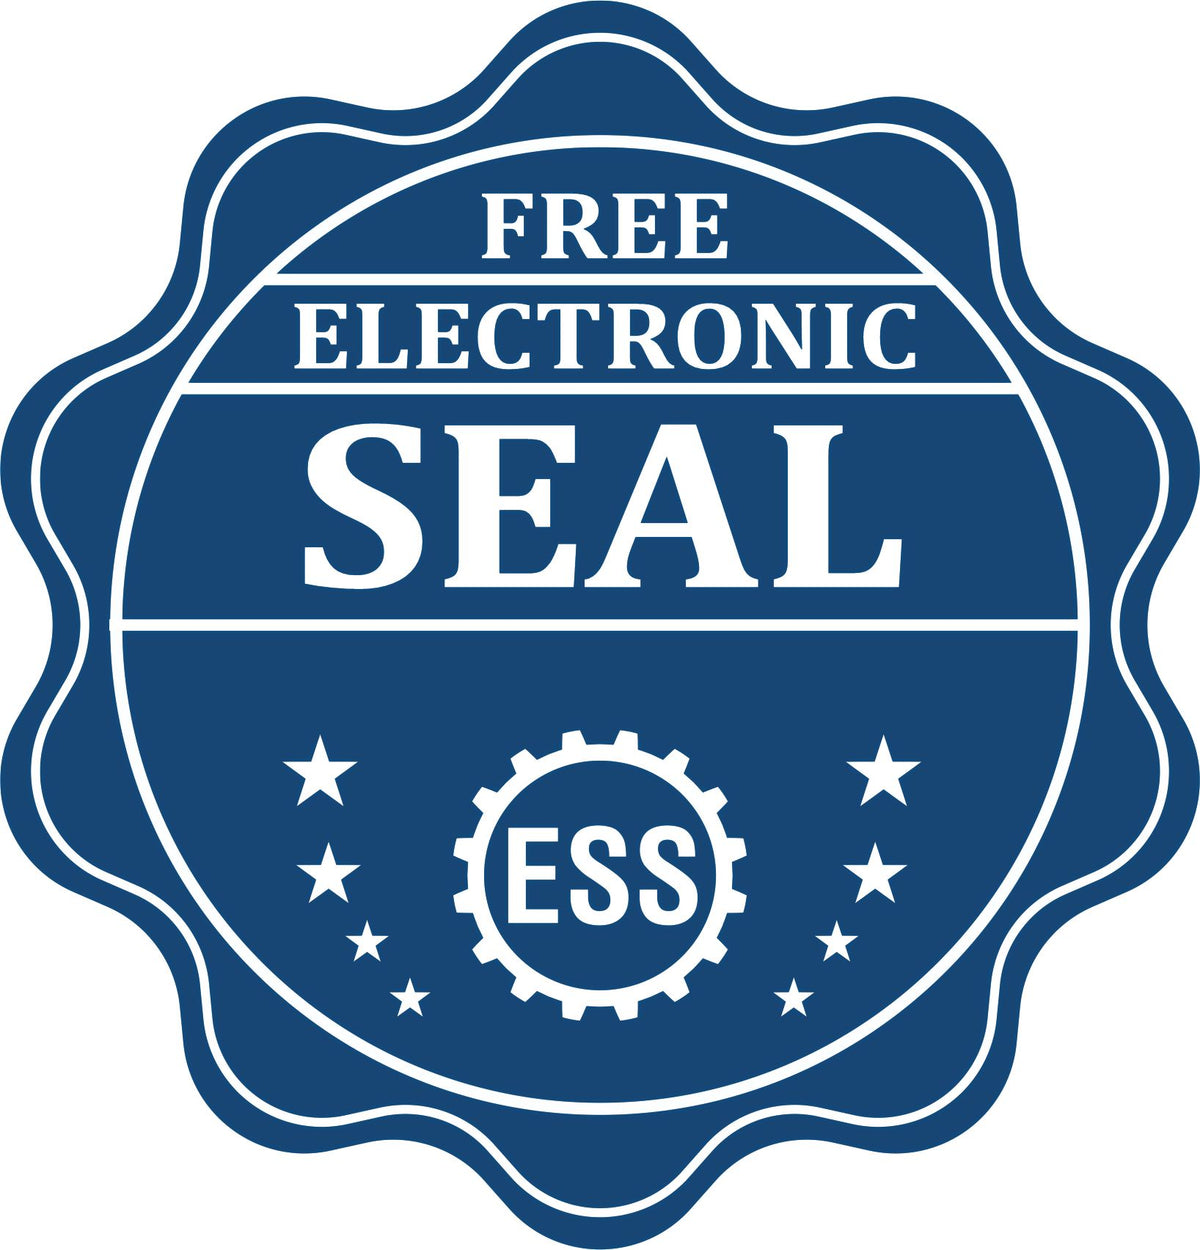 A badge showing a free electronic seal for the PSI Utah Notary Stamp with stars and the ESS gear on the emblem.